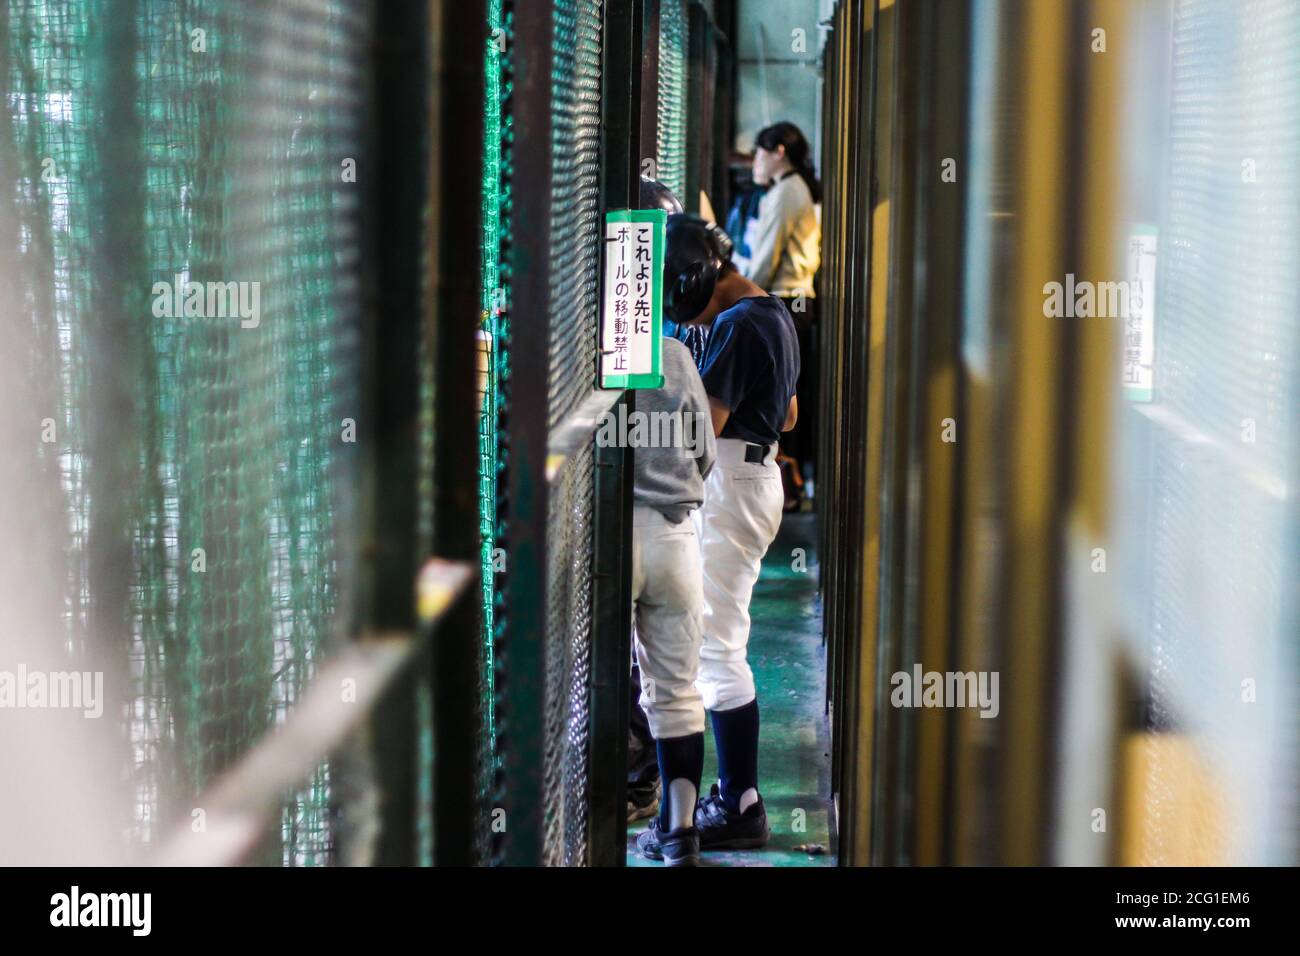 Japanese people waiting in line at a batting cage Stock Photo